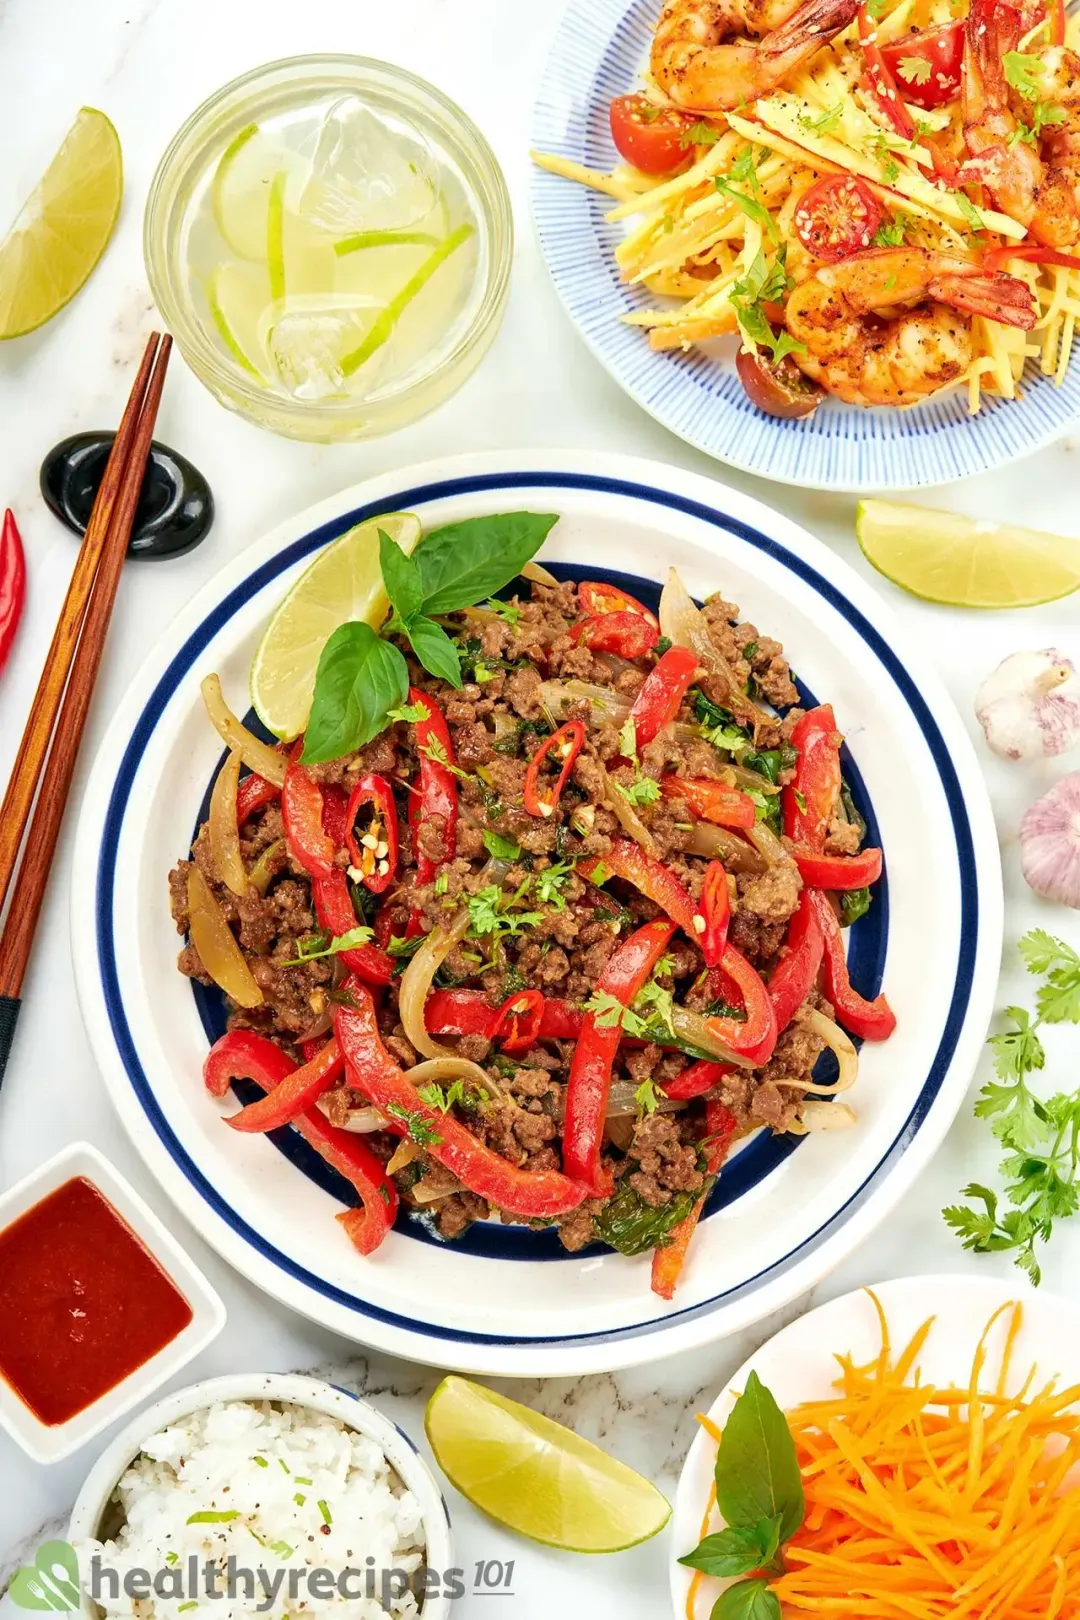 What to Serve With Thai Basil Beef